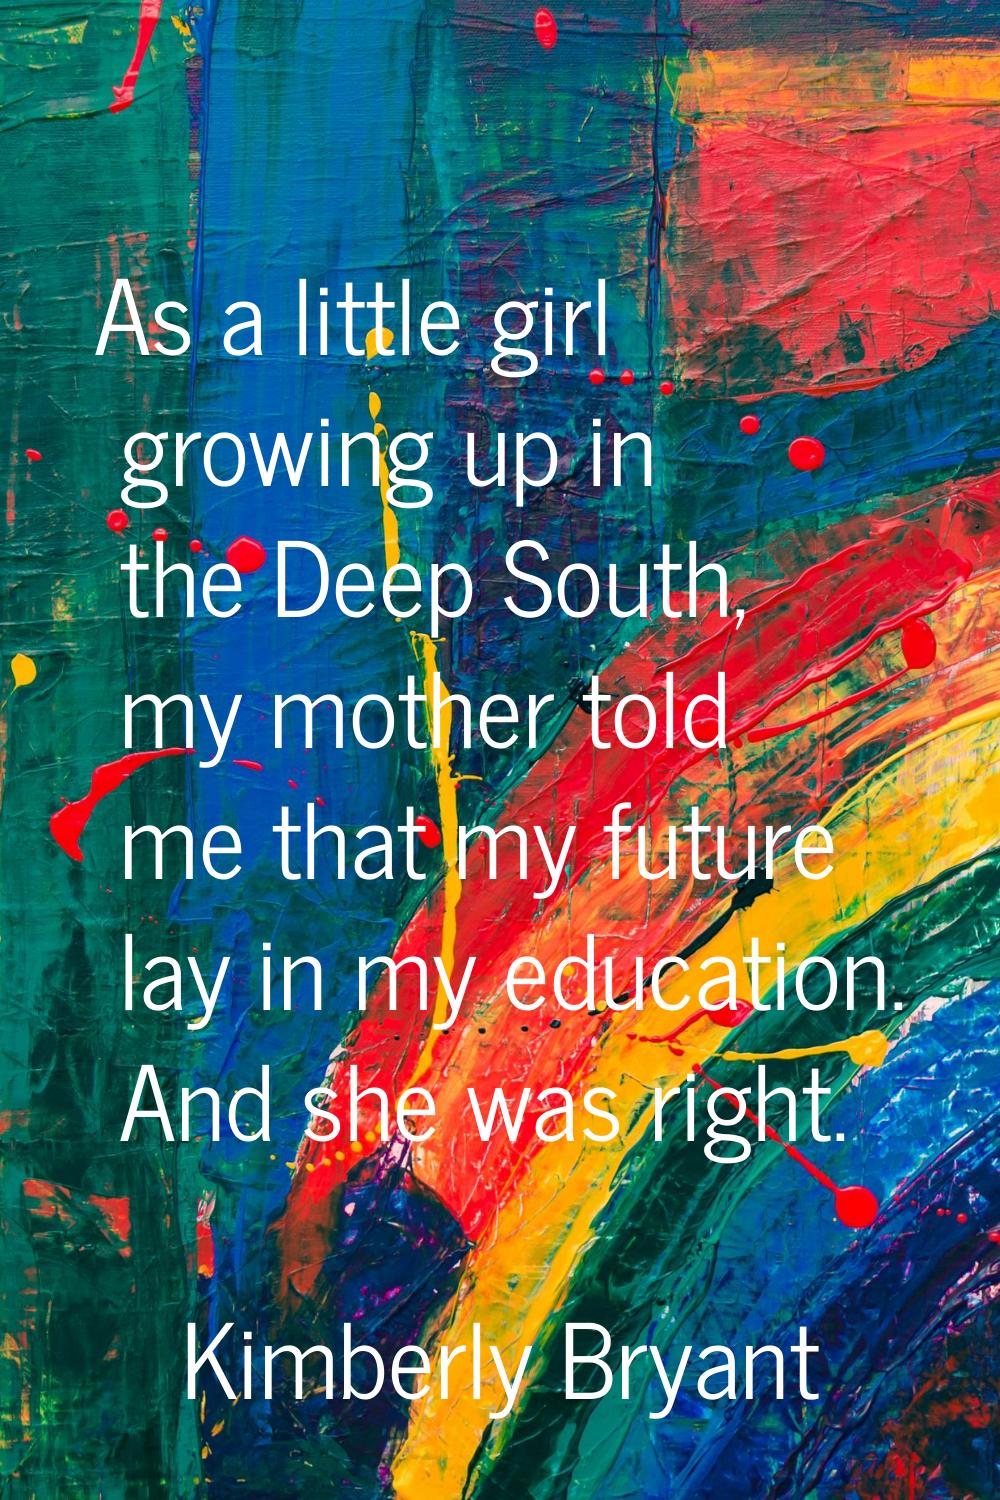 As a little girl growing up in the Deep South, my mother told me that my future lay in my education